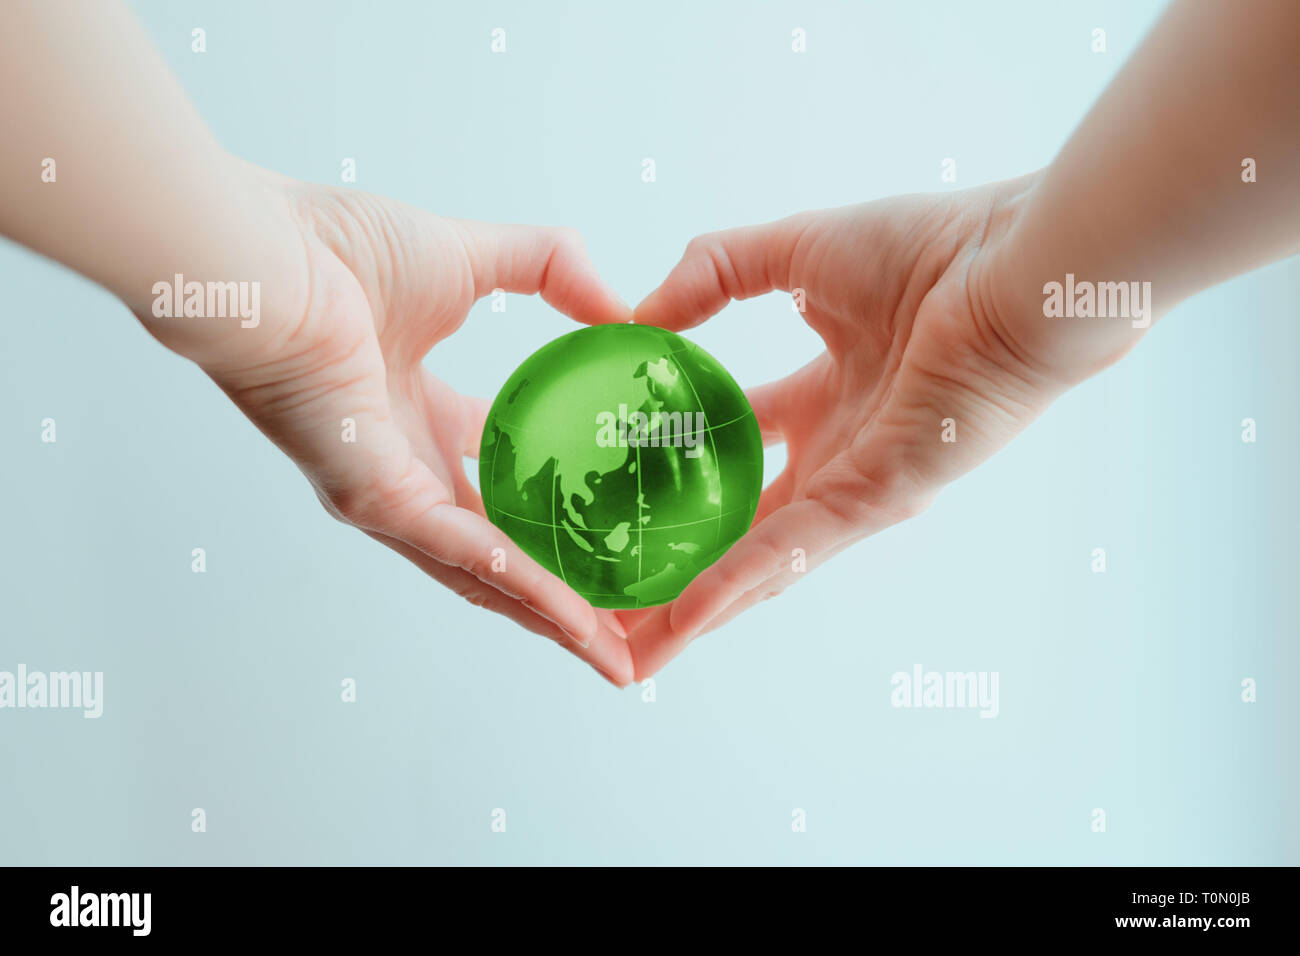 Two hands in shape of a heart holding a green glass globe of Indoneasia and Phillipine sea Stock Photo